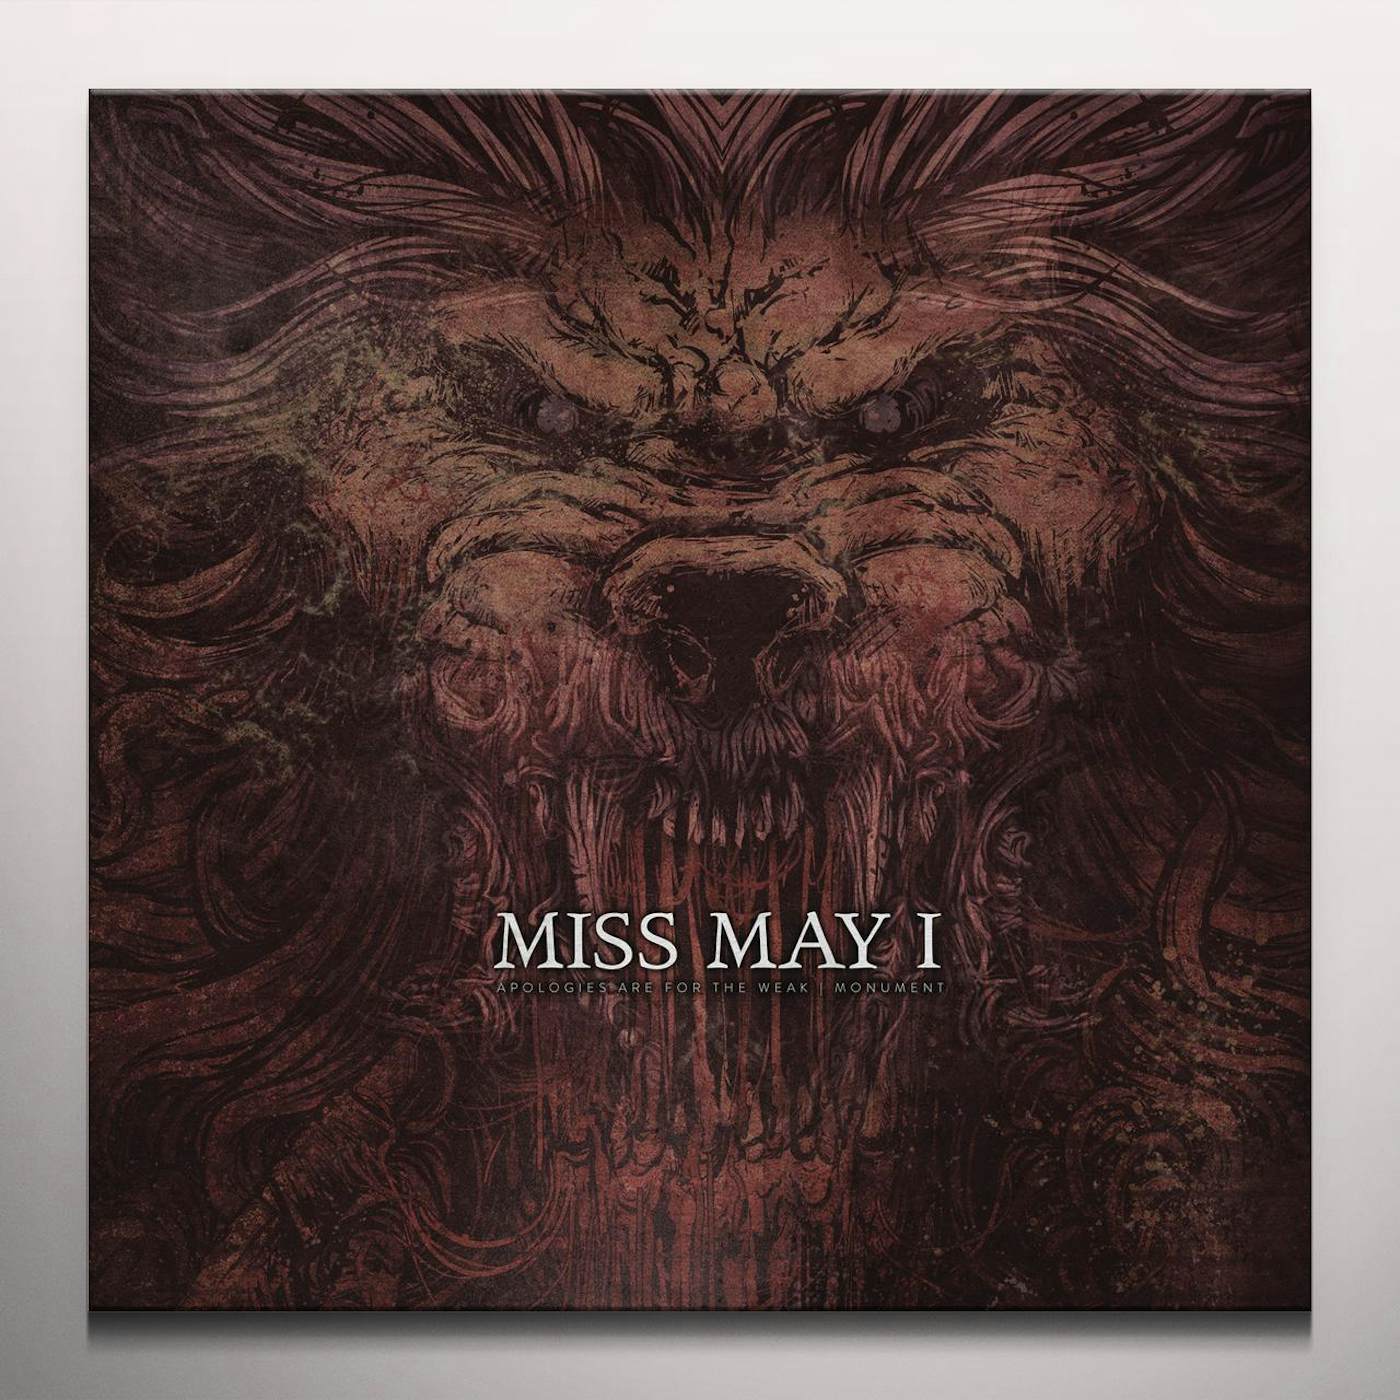 Miss May I APOLOGIES ARE FOR THE WEAK + MONUMENT Vinyl Record